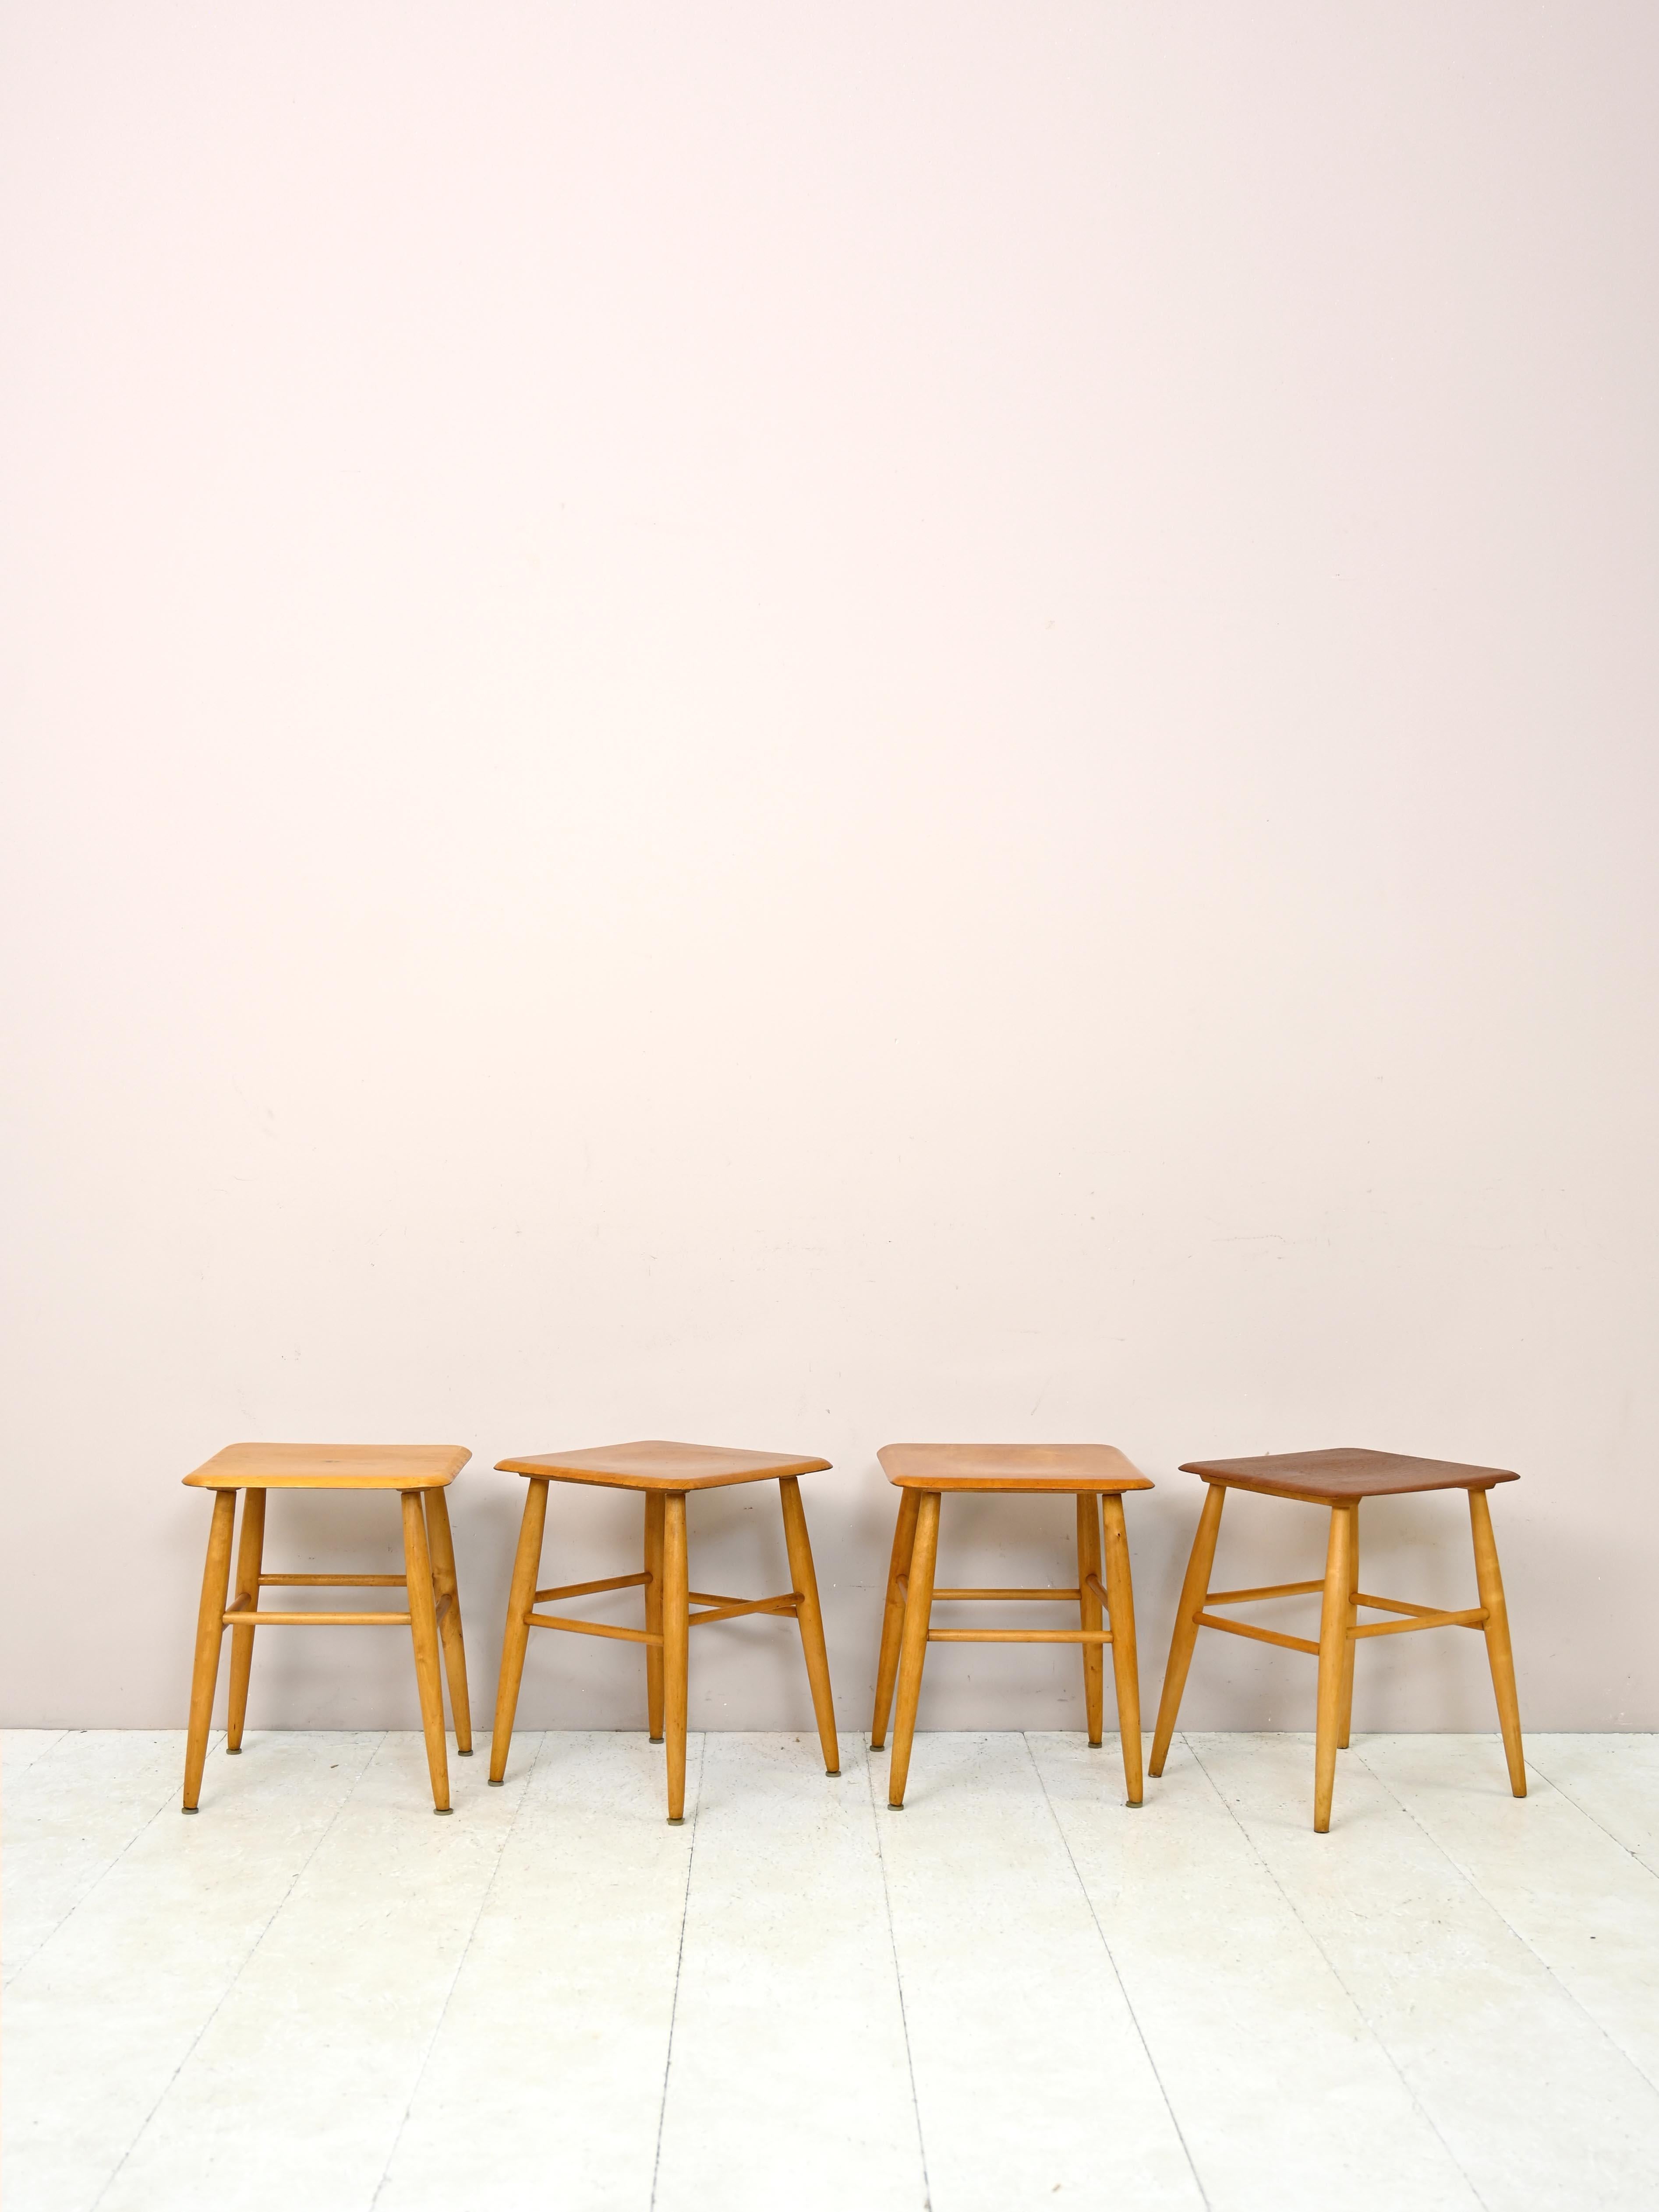 Set of 4 Edsby Verken stools.

Simple and lightweight stool model produced by the Swedish company Edsby Verken in the 1960s. High-quality material and finely executed seat make them especially lightweight. 

Good condition. Conservative